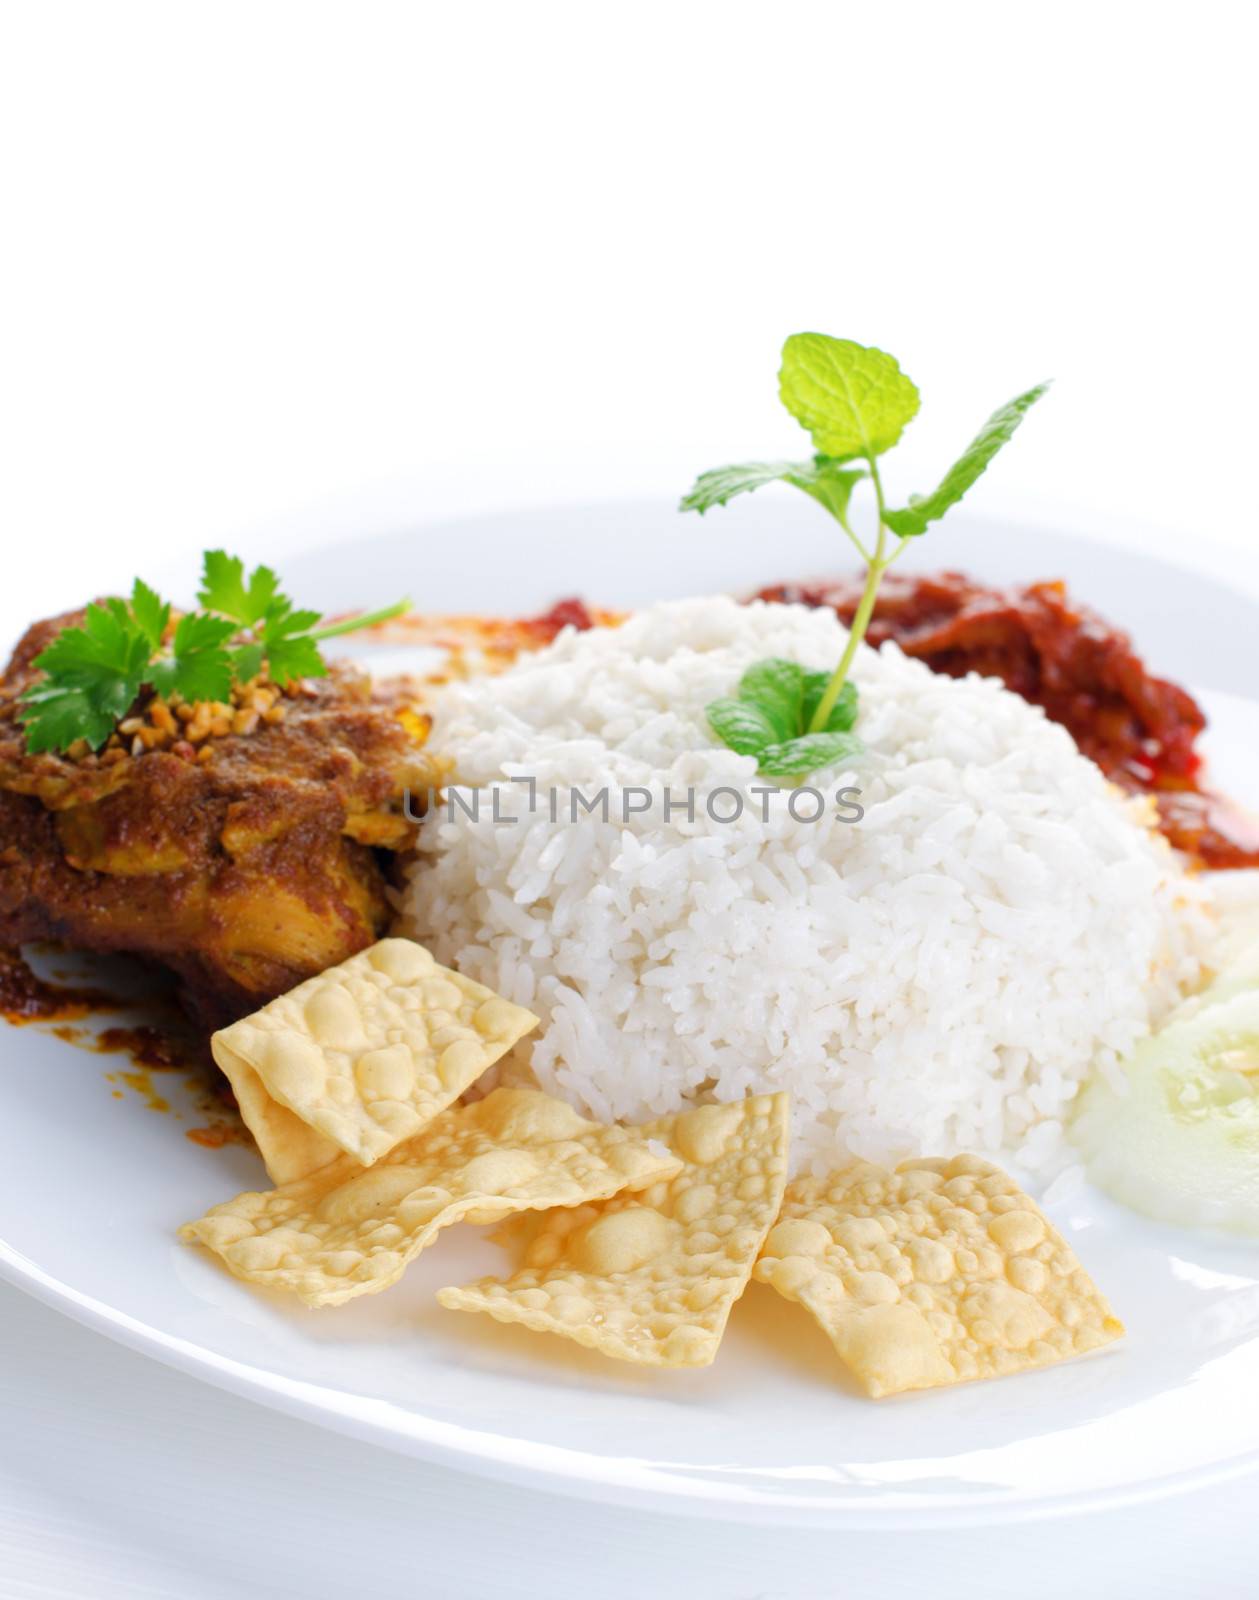 Nasi lemak traditional malaysian hot and spicy rice dish. Served with belacan, ikan bilis, acar, peanuts and cucumber. White background. Famous malaysian food.